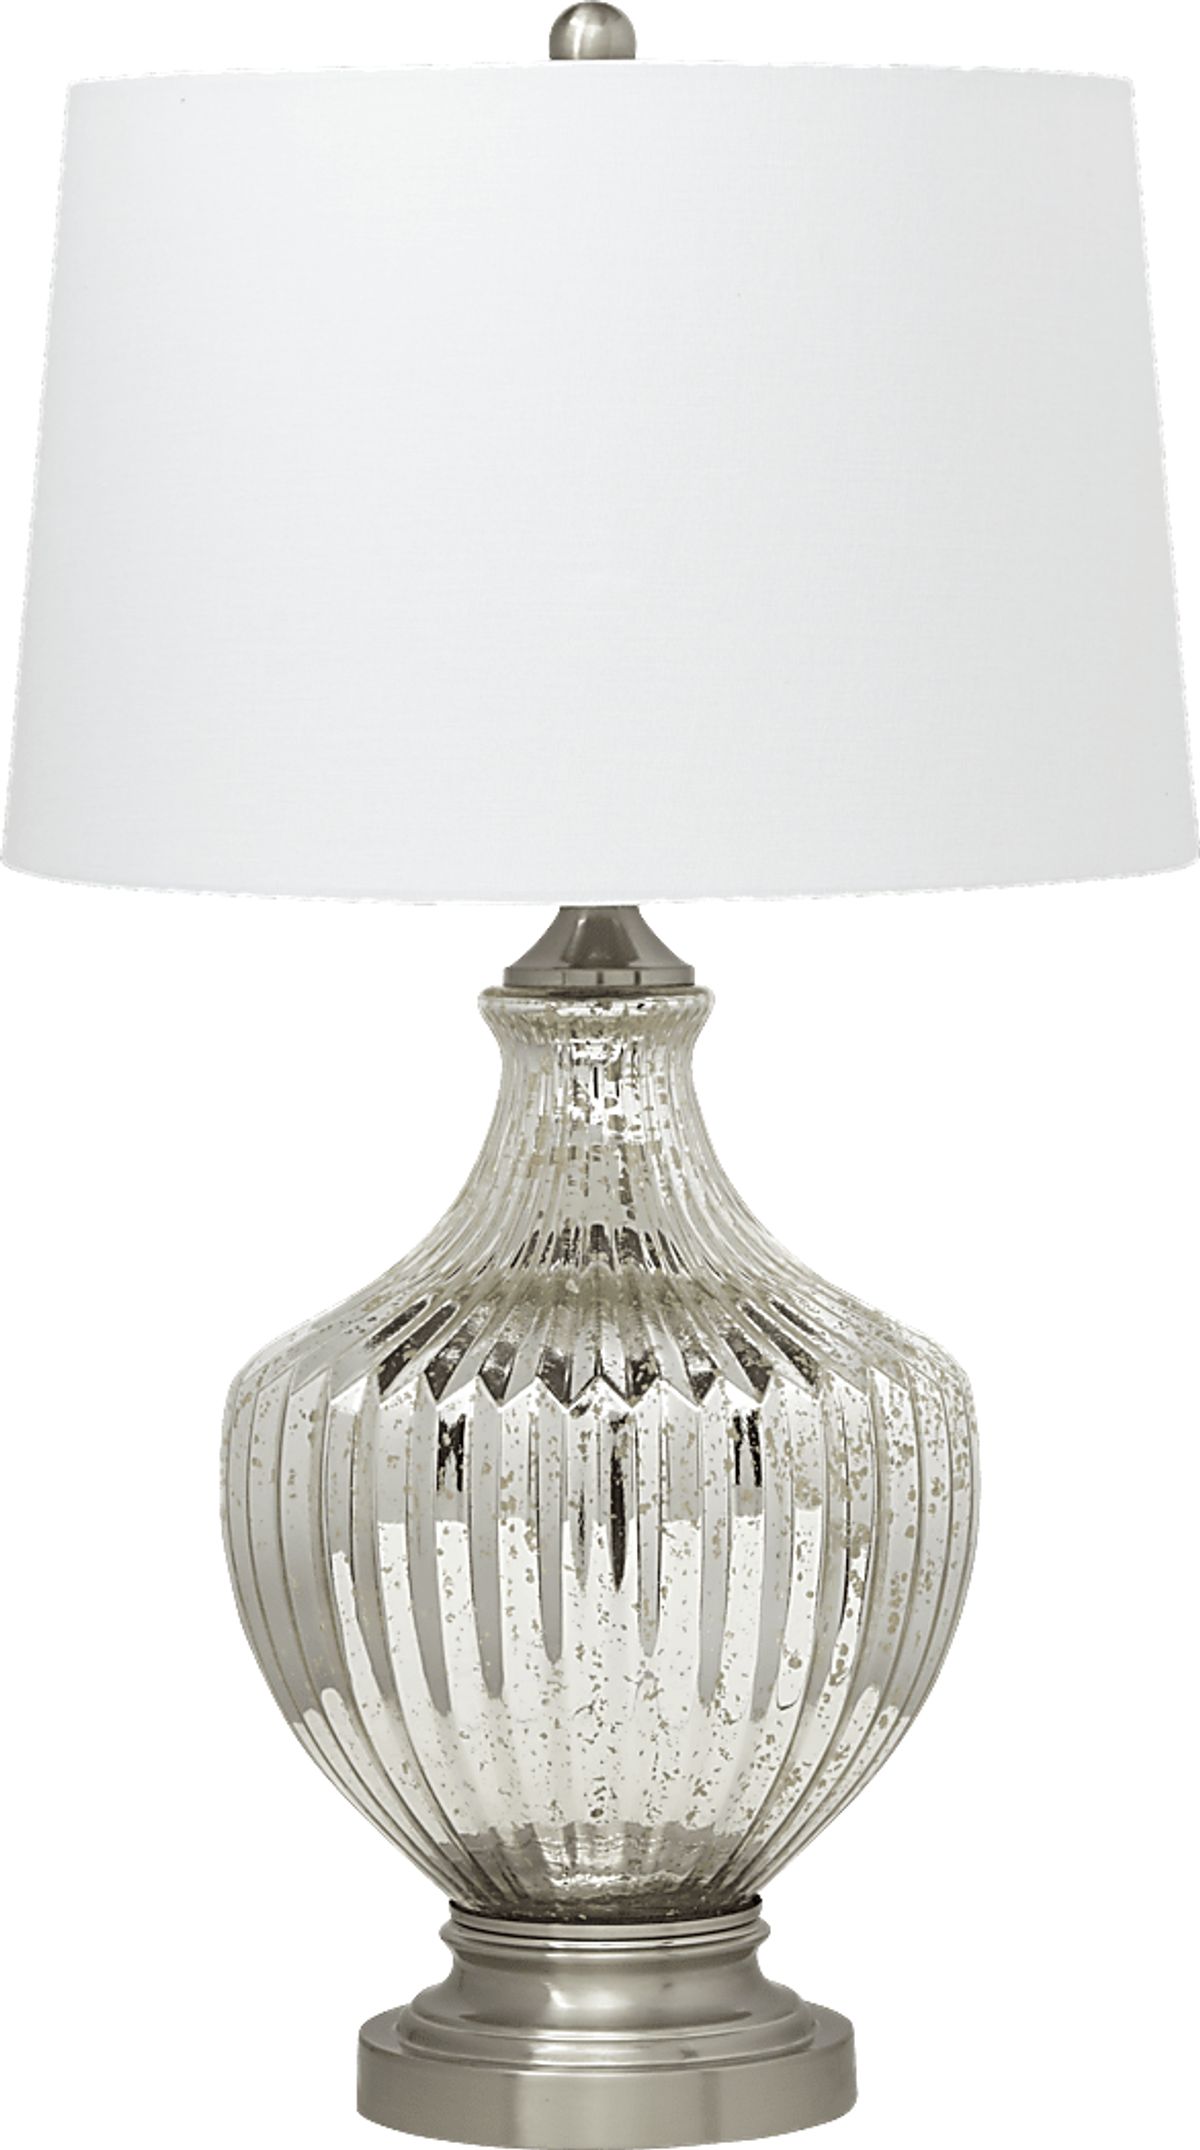 Savion Silver Gray Table Lamp | Rooms to Go